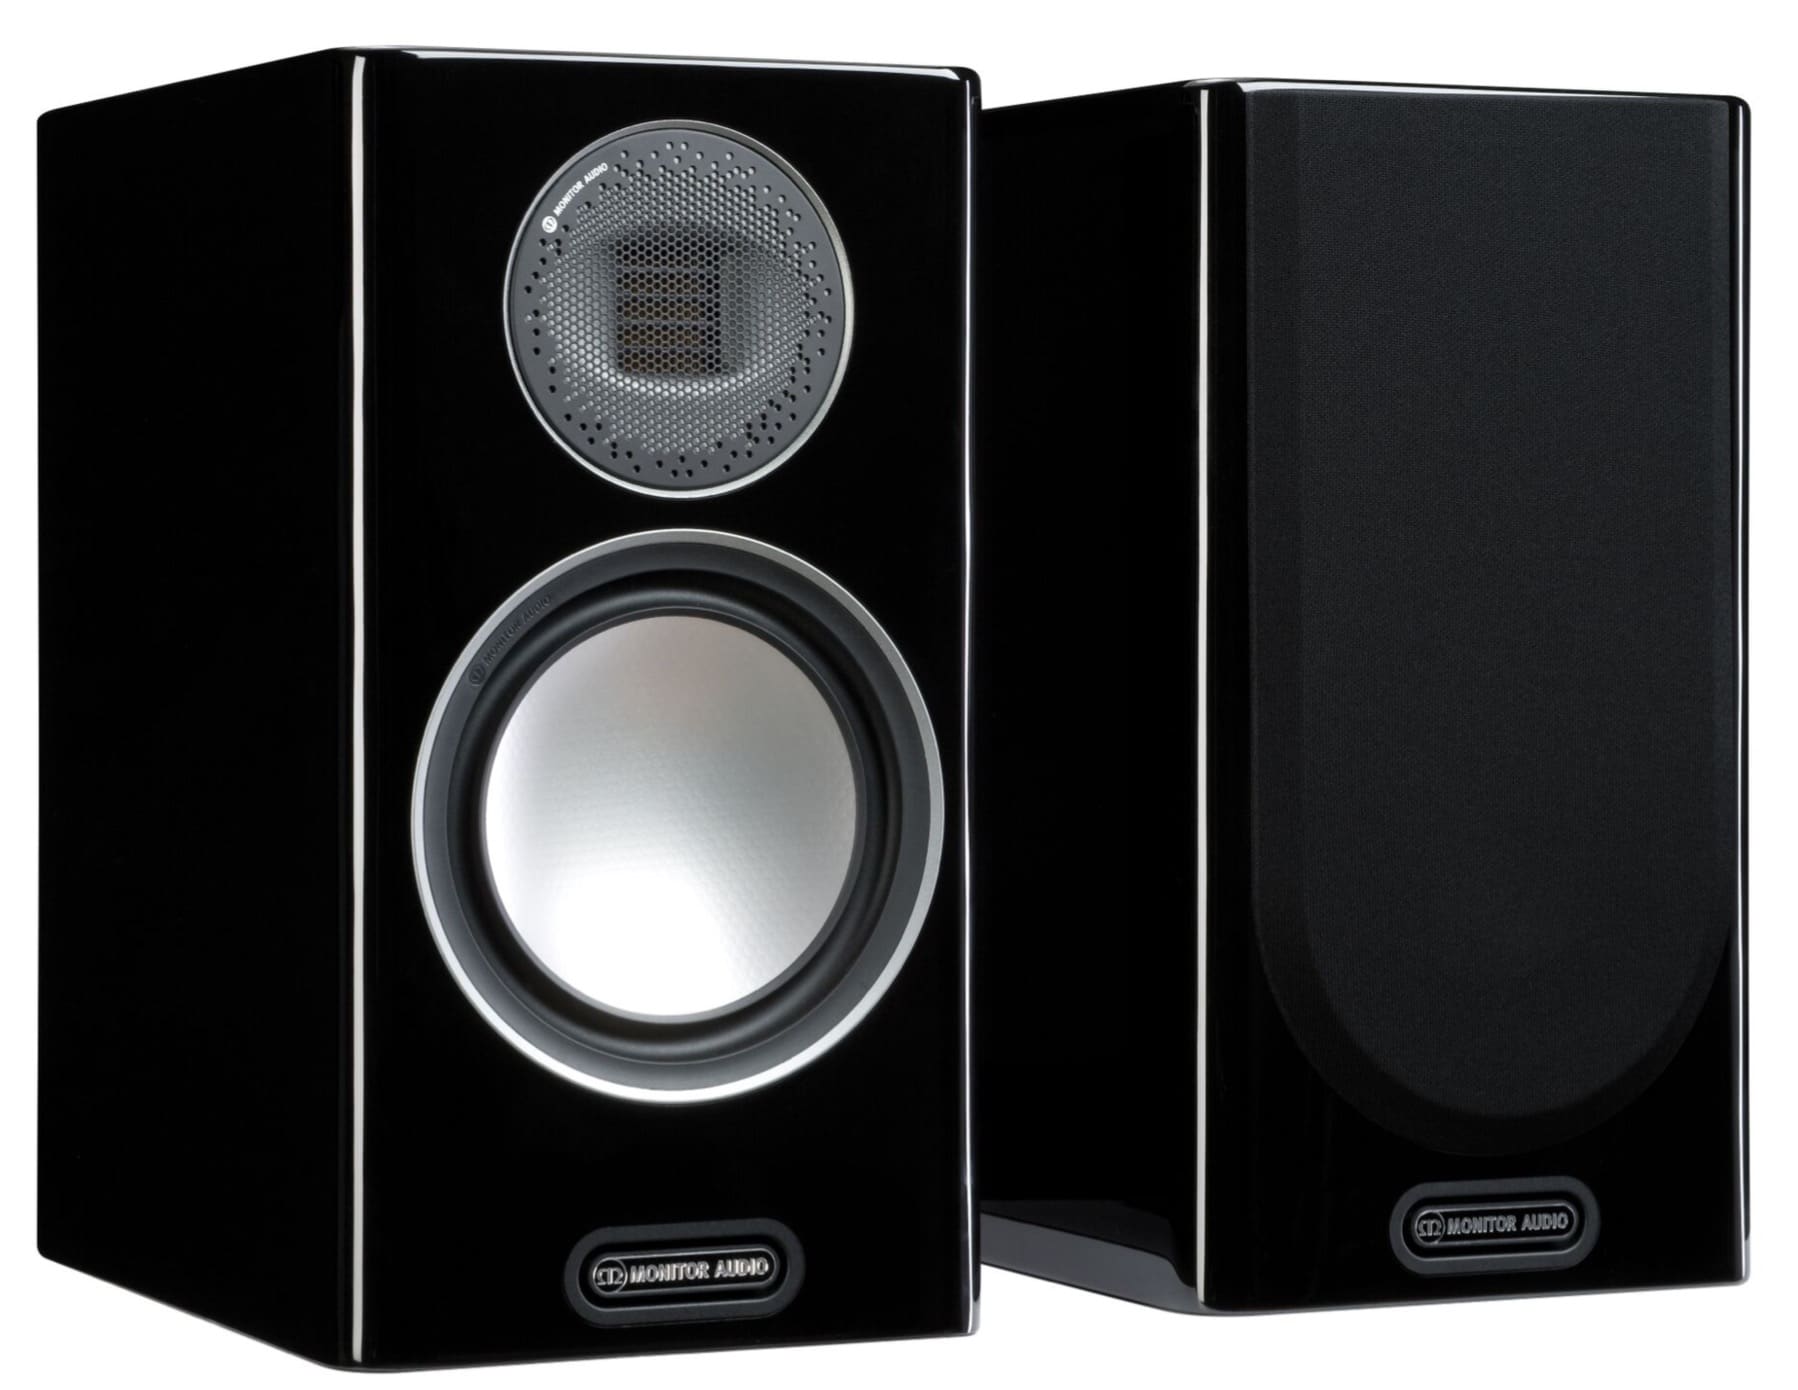 Gold Series Speakers From Monitor Audio